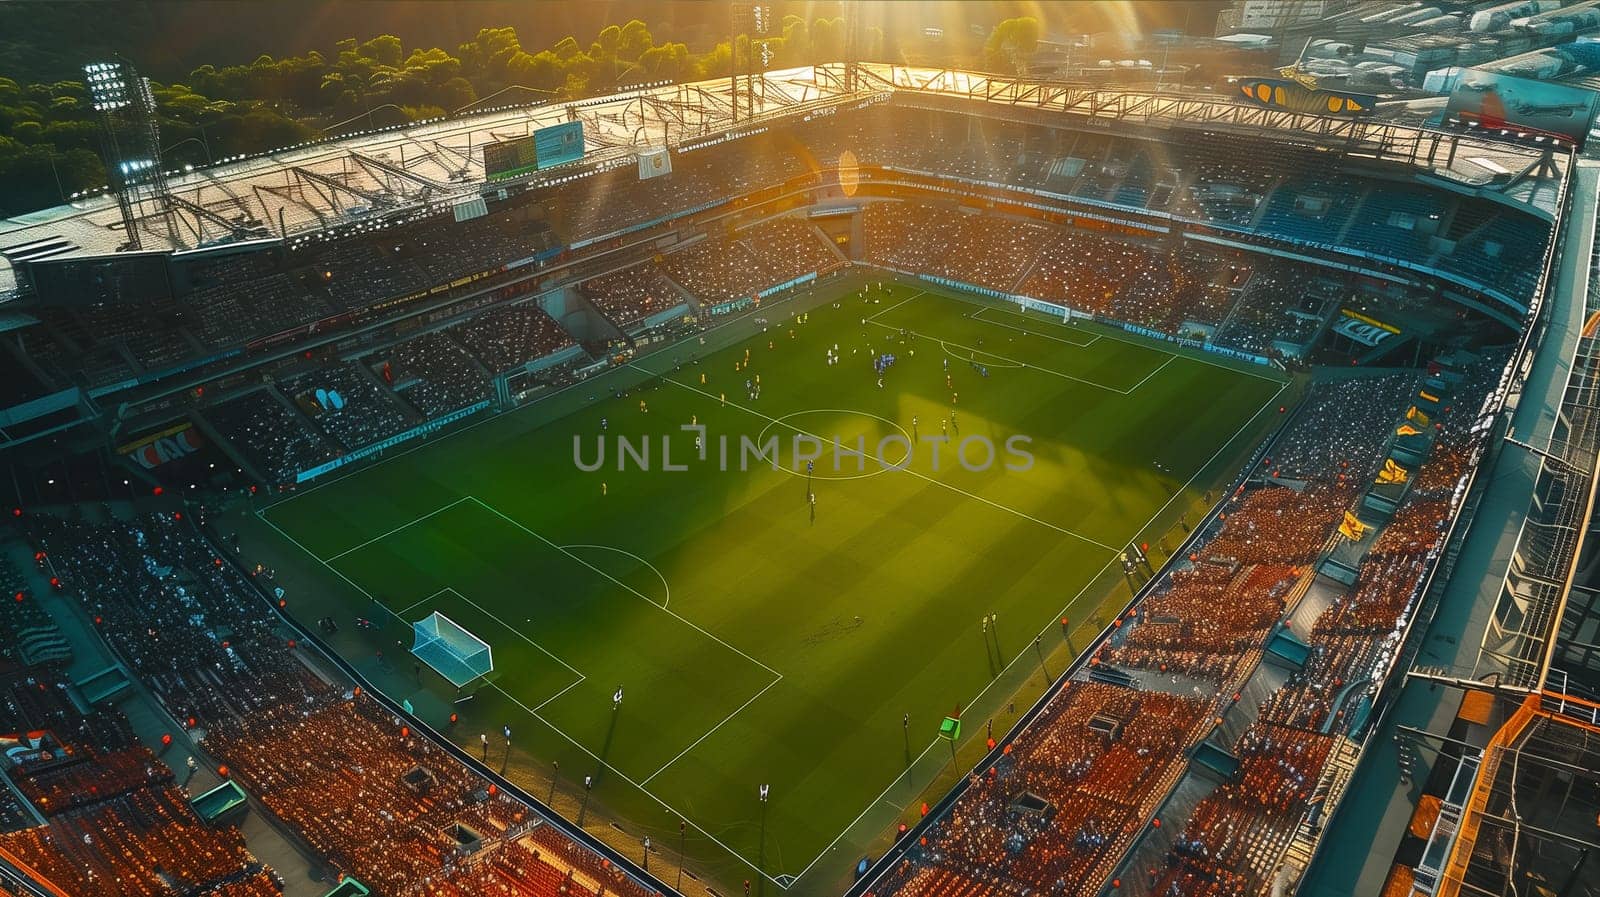 An aerial view capturing the sunset over a bustling soccer stadium, with players on the field and fans in the stands.